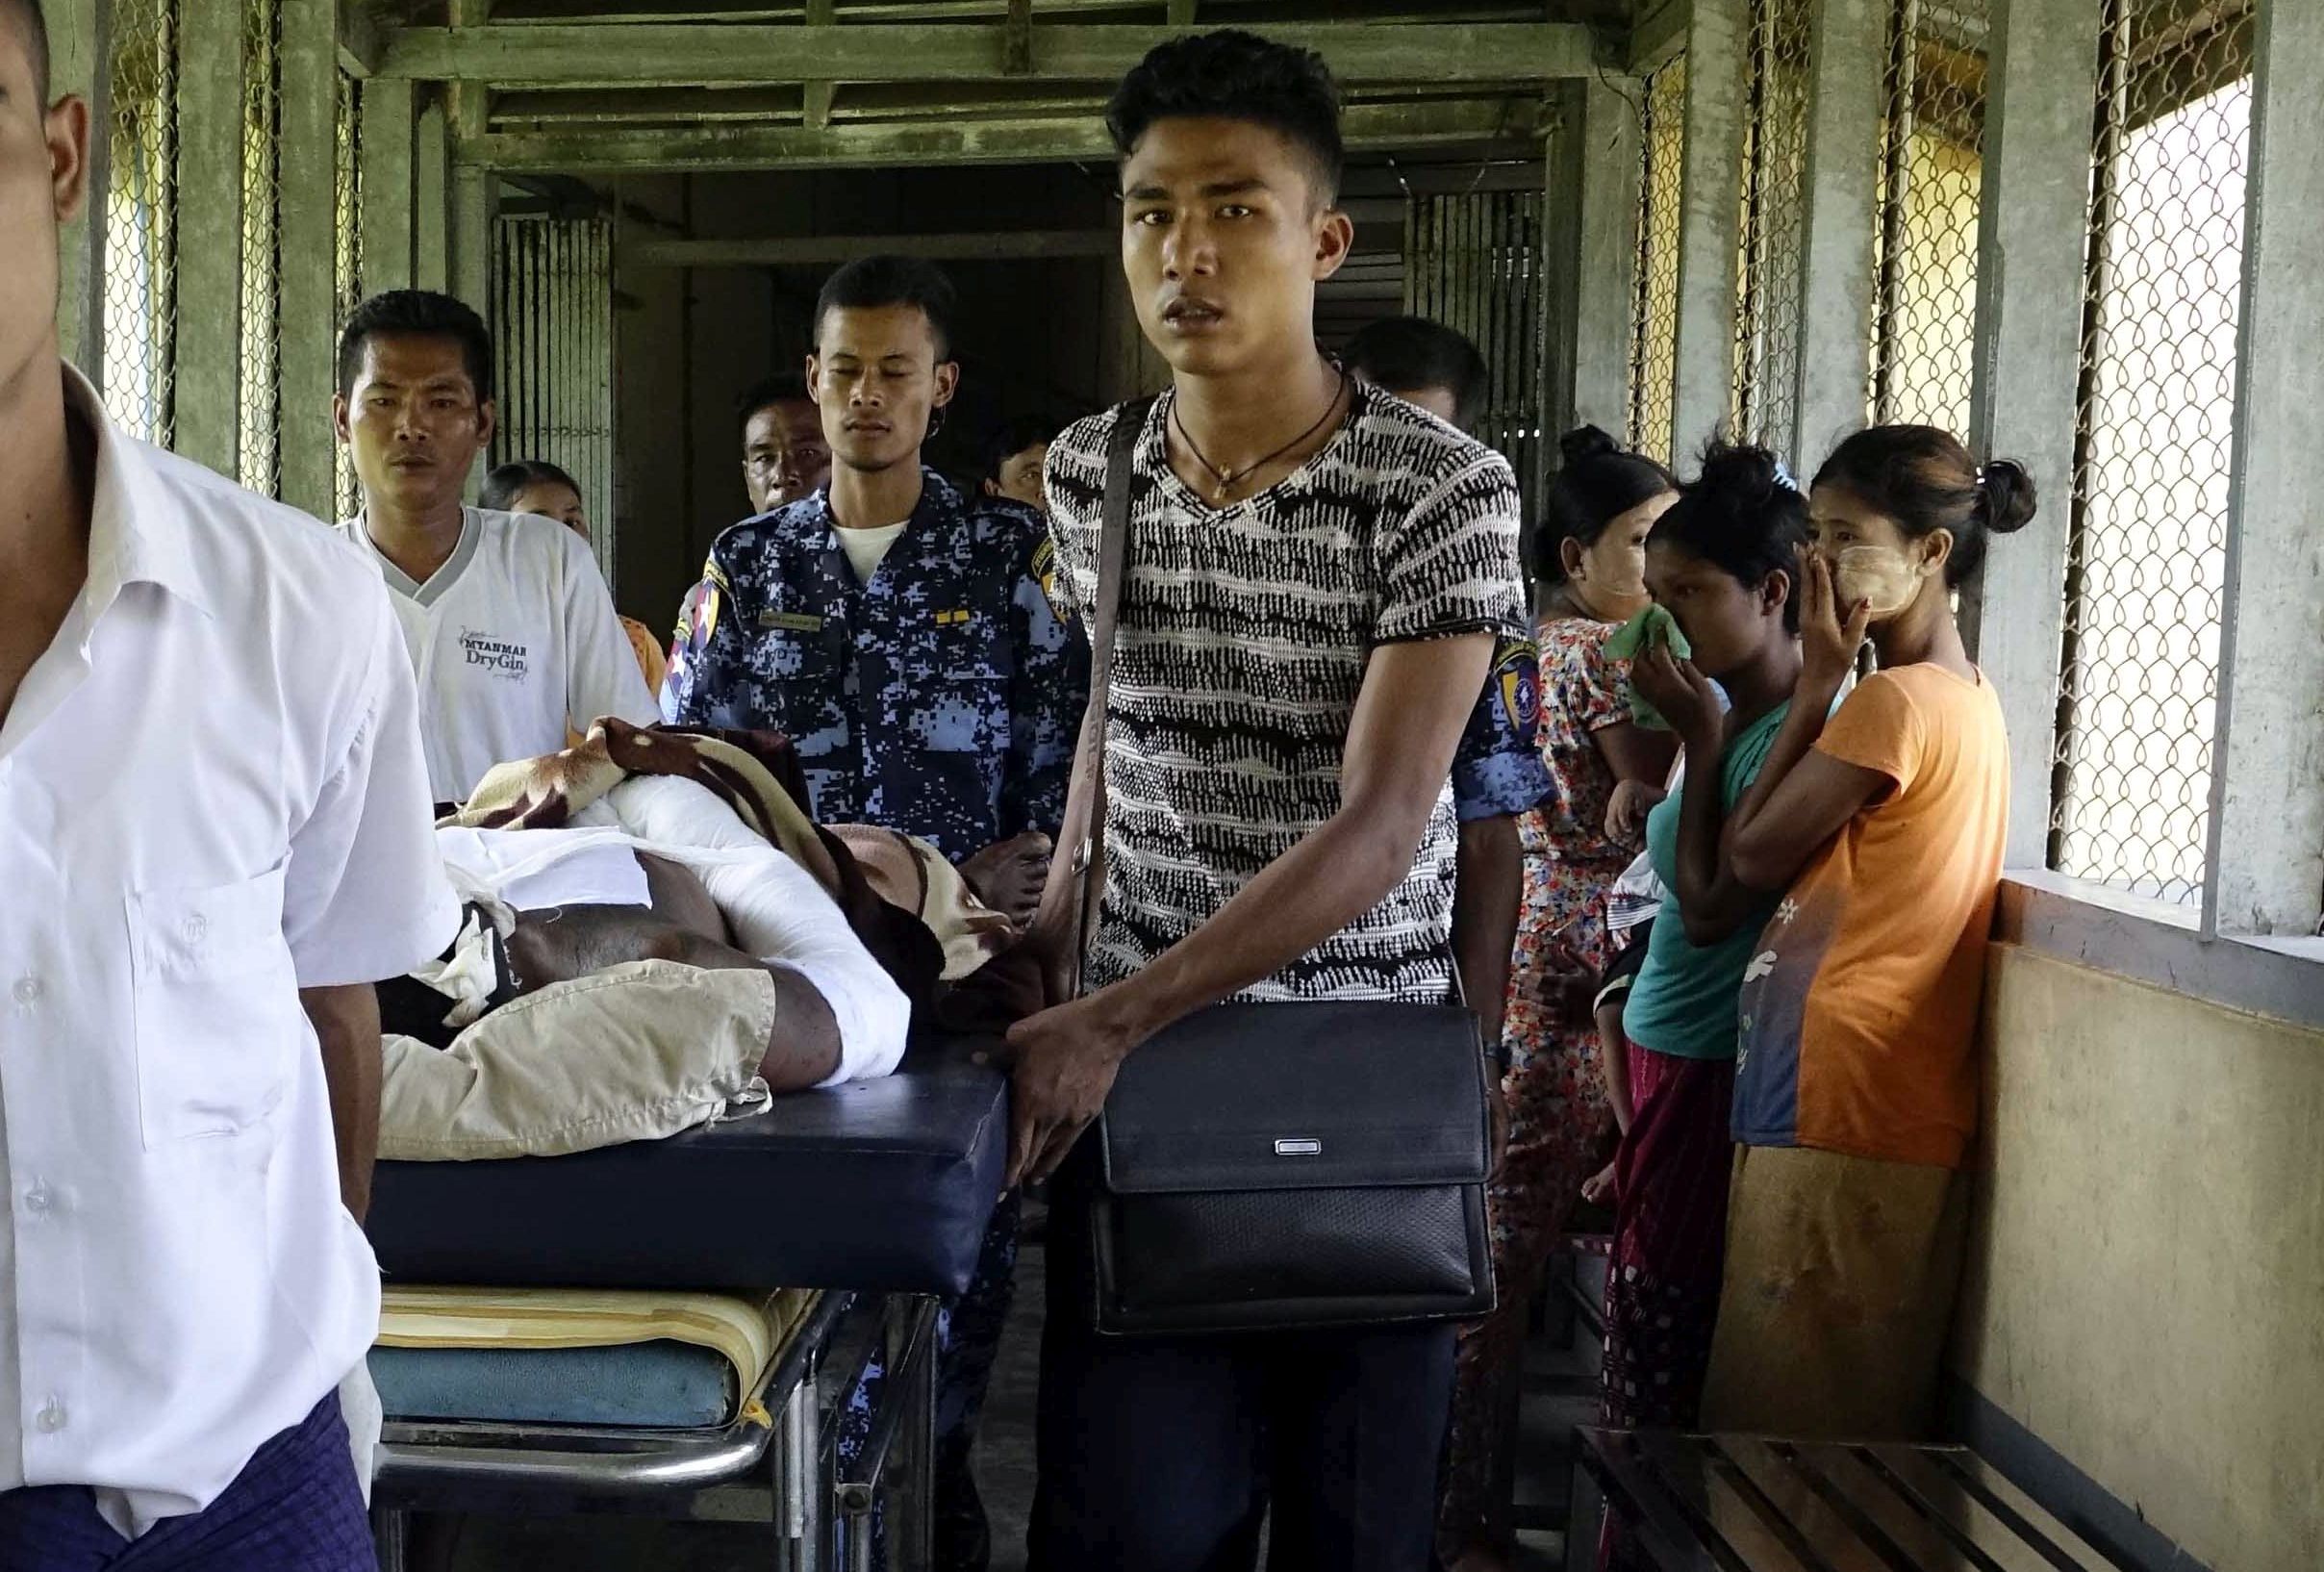 epa06169668 An injured Myanmar police officer (C-R) arrives to the Sittwe hospital, Sittwe, Rakhine State, western Myanmar, 29 August 2017. According to a statement by the Myanmar State Counselor Office Information Committee, a group of eleven law enforcement officials, one government staff, eleven civilians and about 80 militants from the Arakan Rohingya Salvation Army (ARSA) terrorist group were killed during fighting between 25 to 27 August 2017 in Myanmar after ARSA fighters attacked police outposts and an army base in the western state of Rakhine. The Central Committee for Counter Terrorism of Myanmar had declared ARSA a terrorist group on 25 August.  EPA/NYUNT WIN